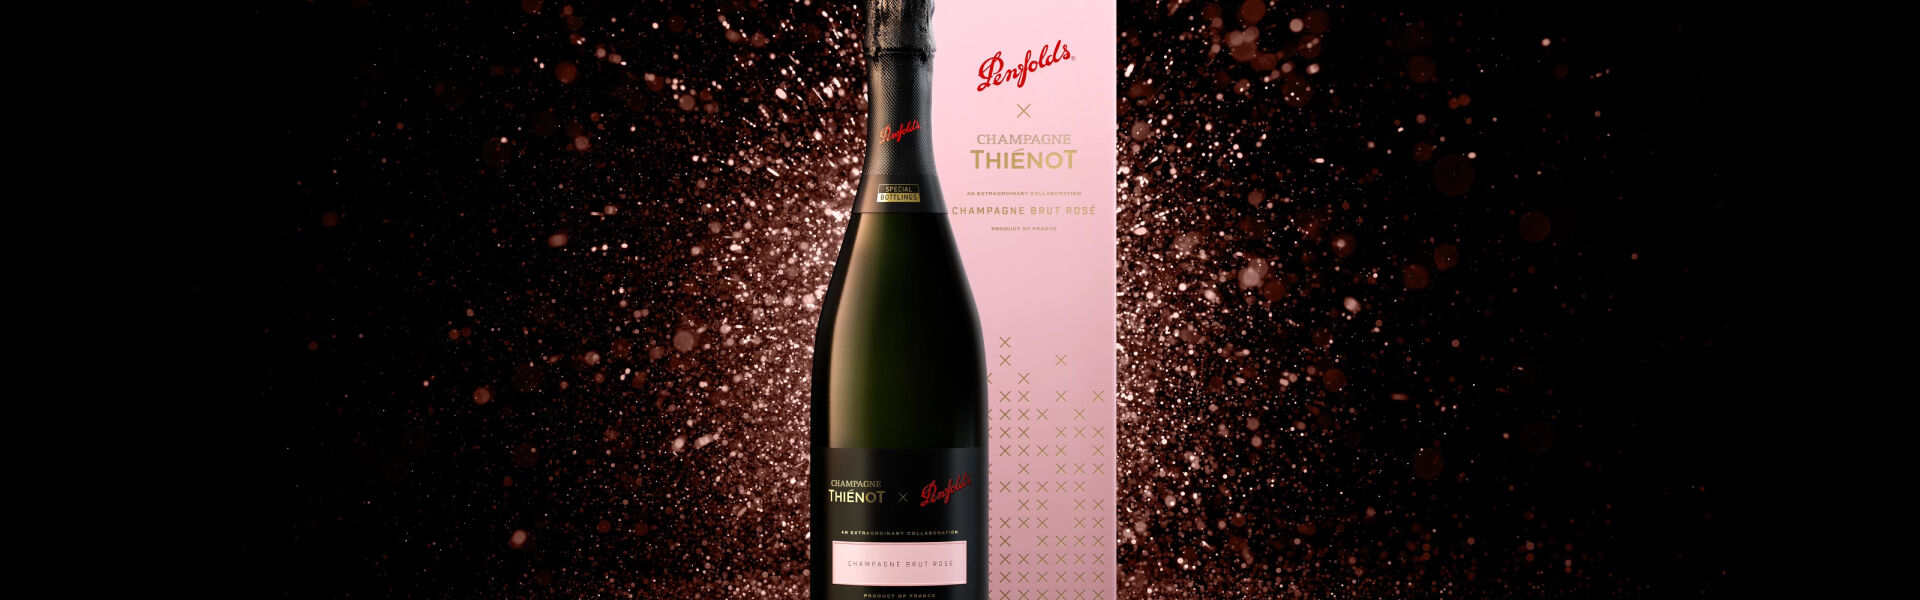 Penfolds Champagne ROse